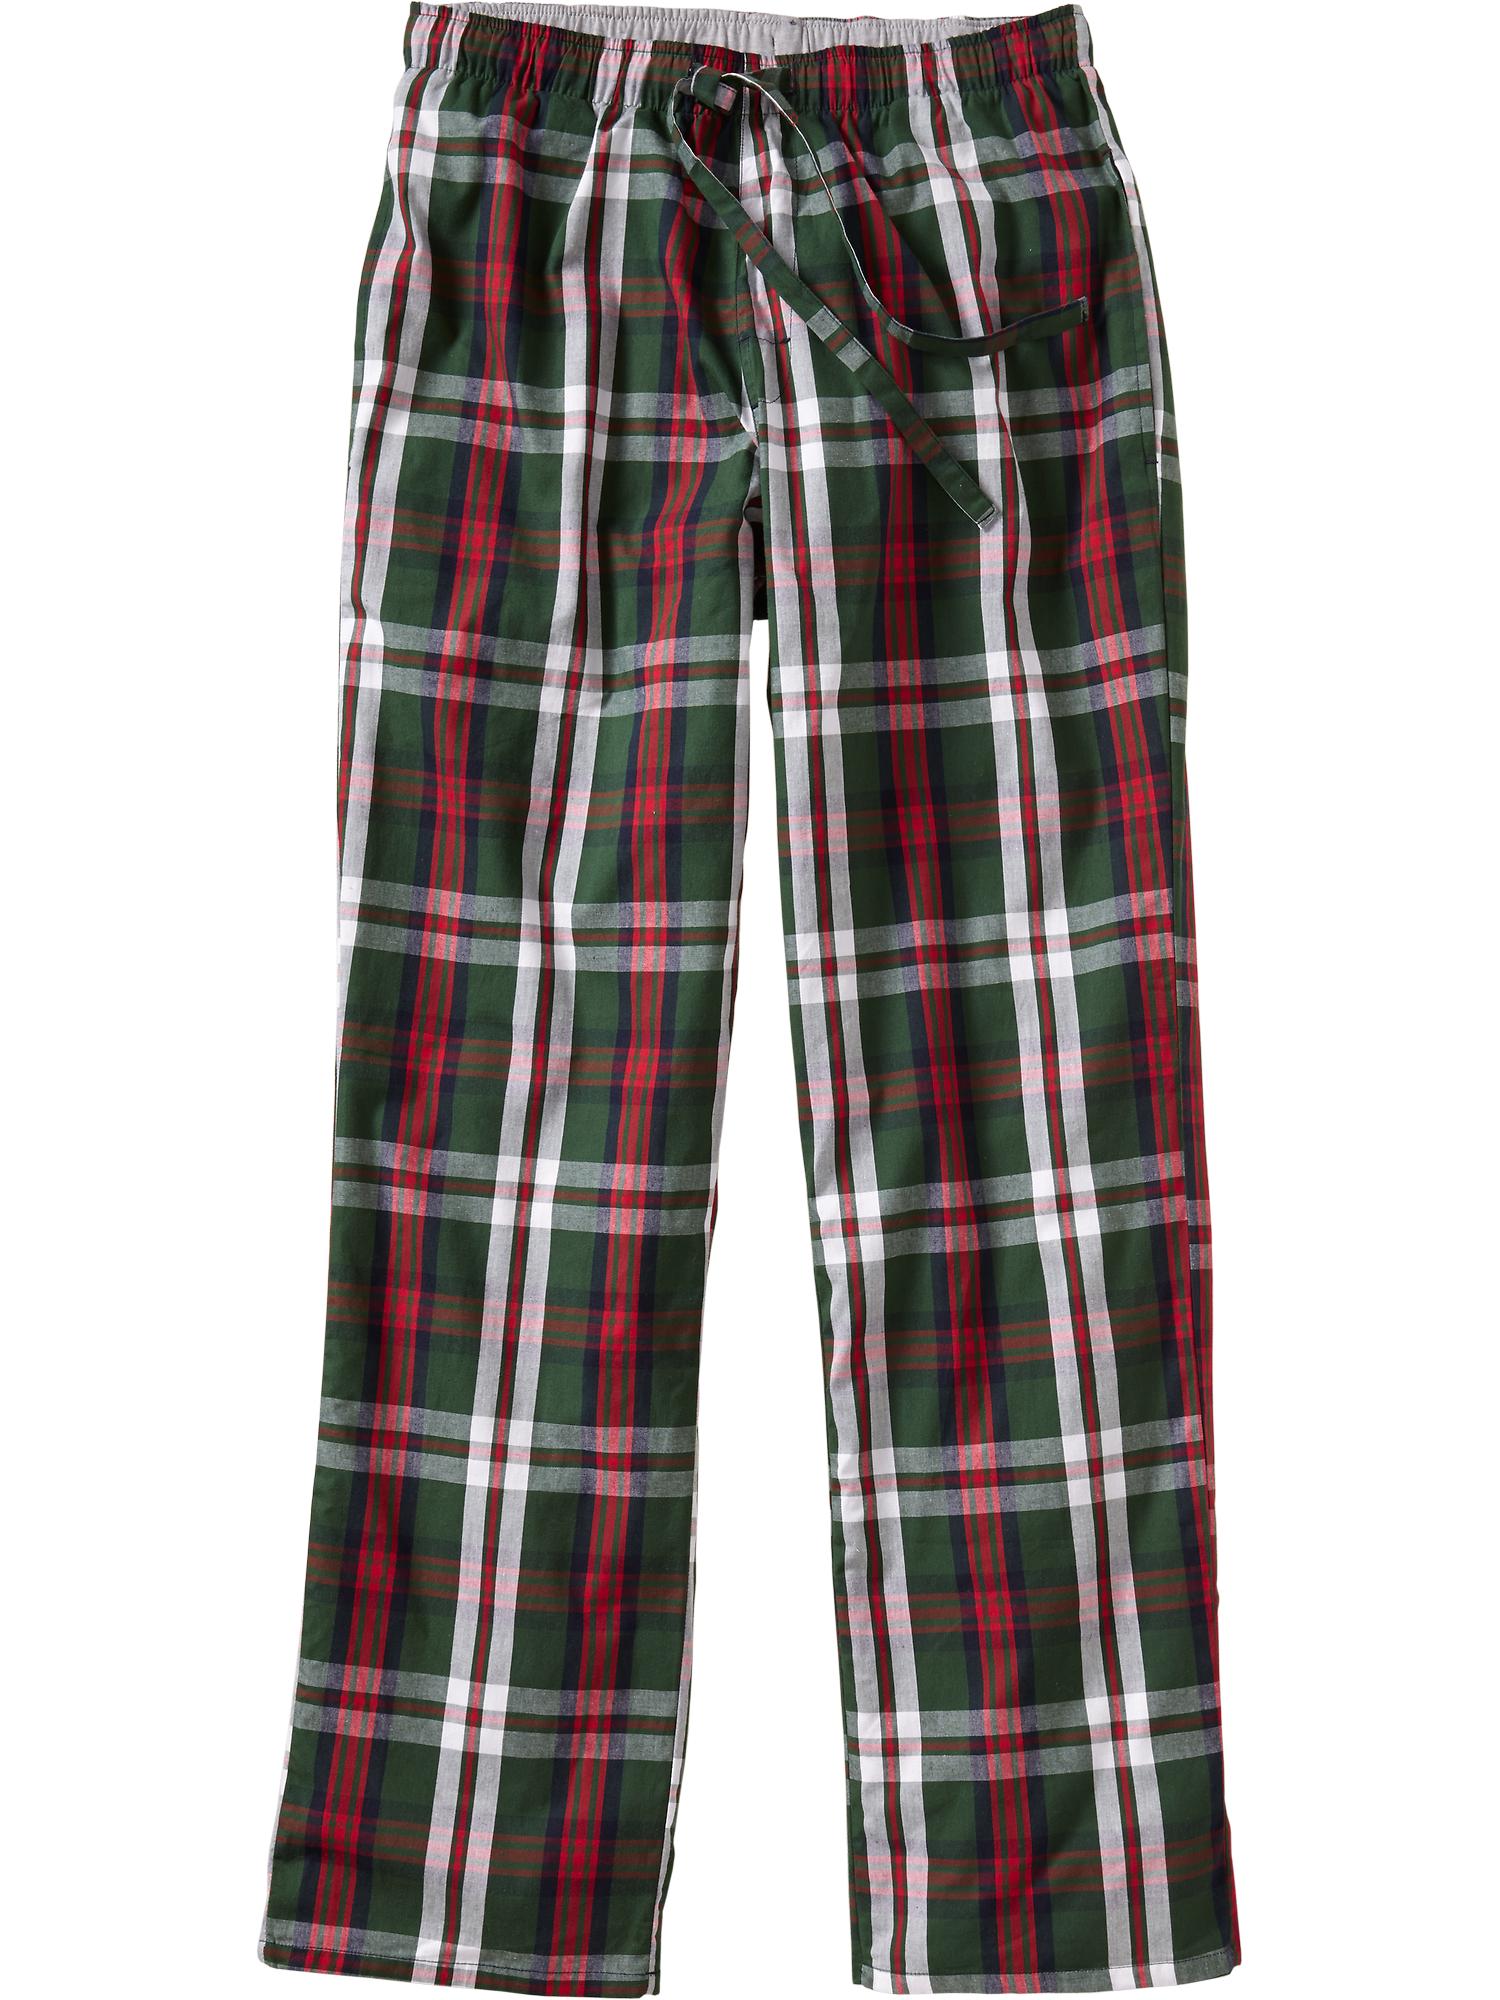 Red And Green Plaid Pants images